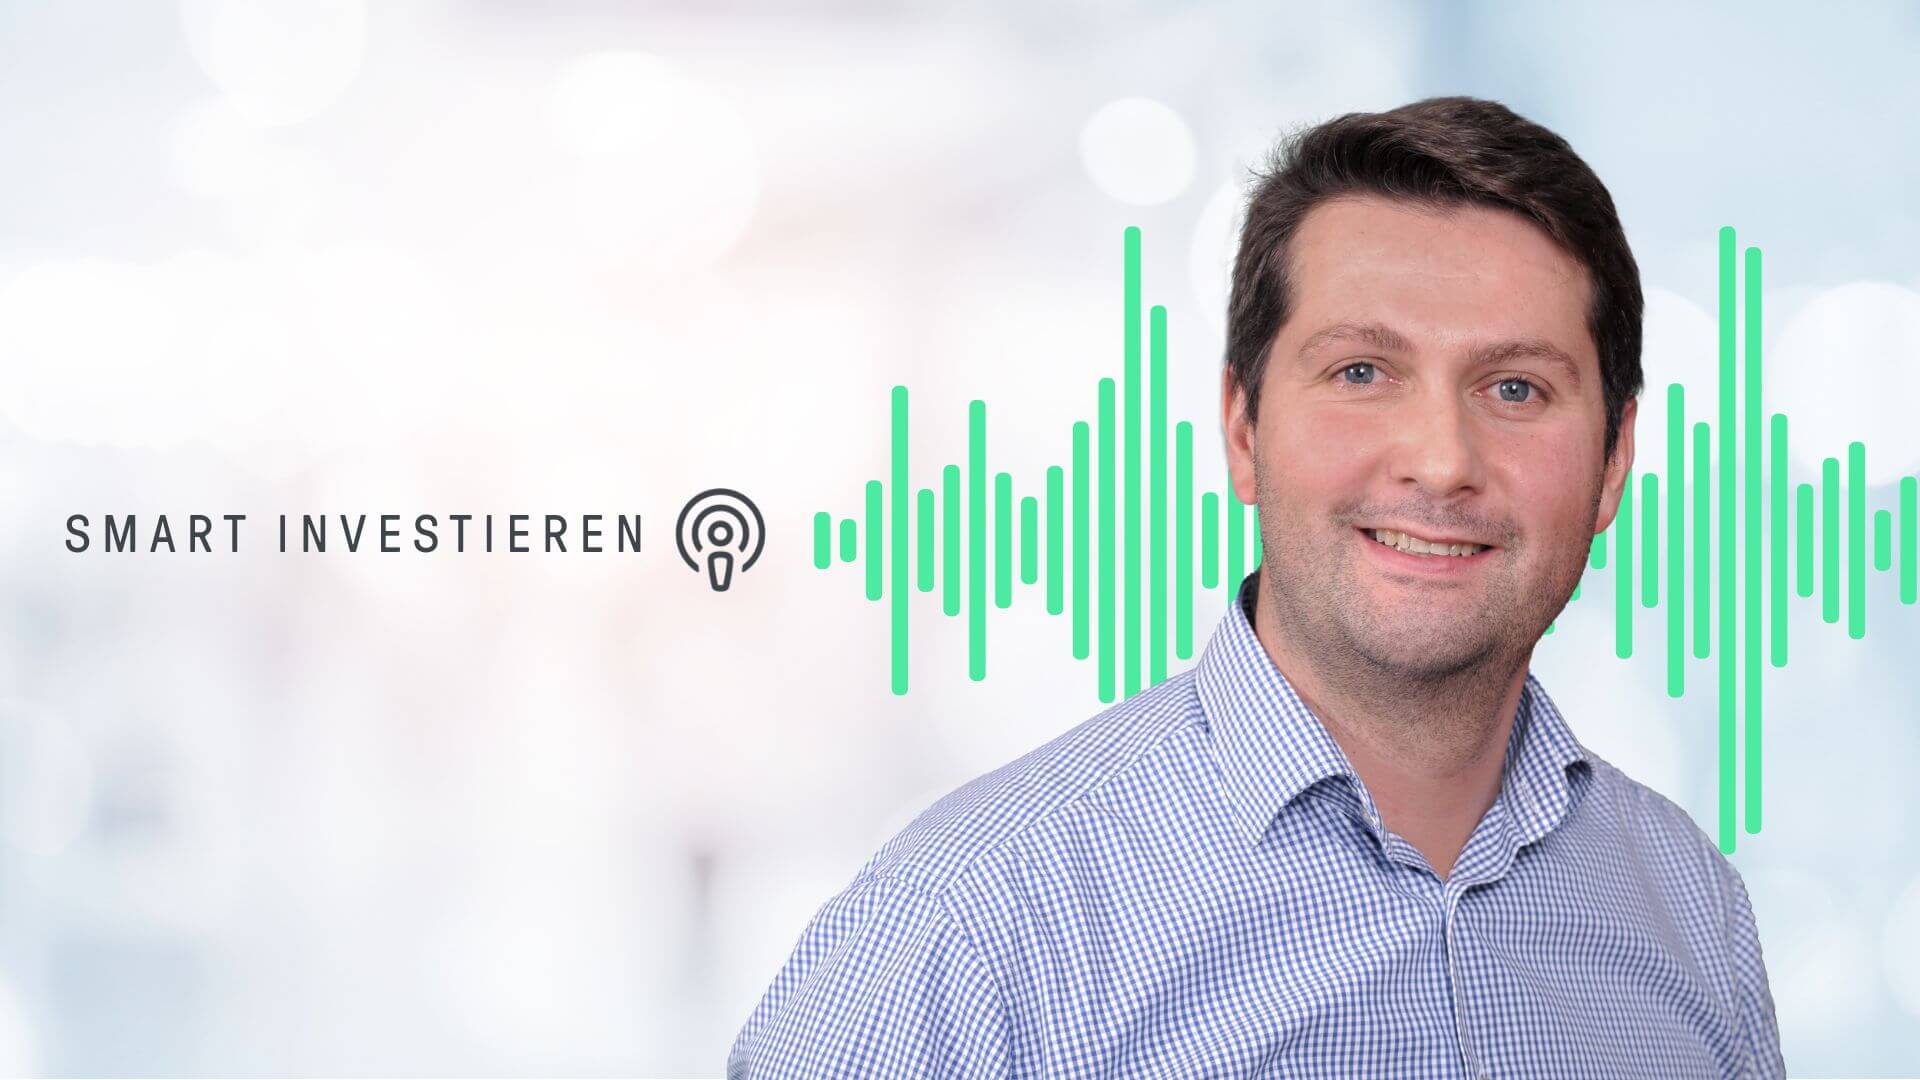 EQS Group: Expansion mit Compliance Software - Podcast mit André Marques | LYNX Online-Broker